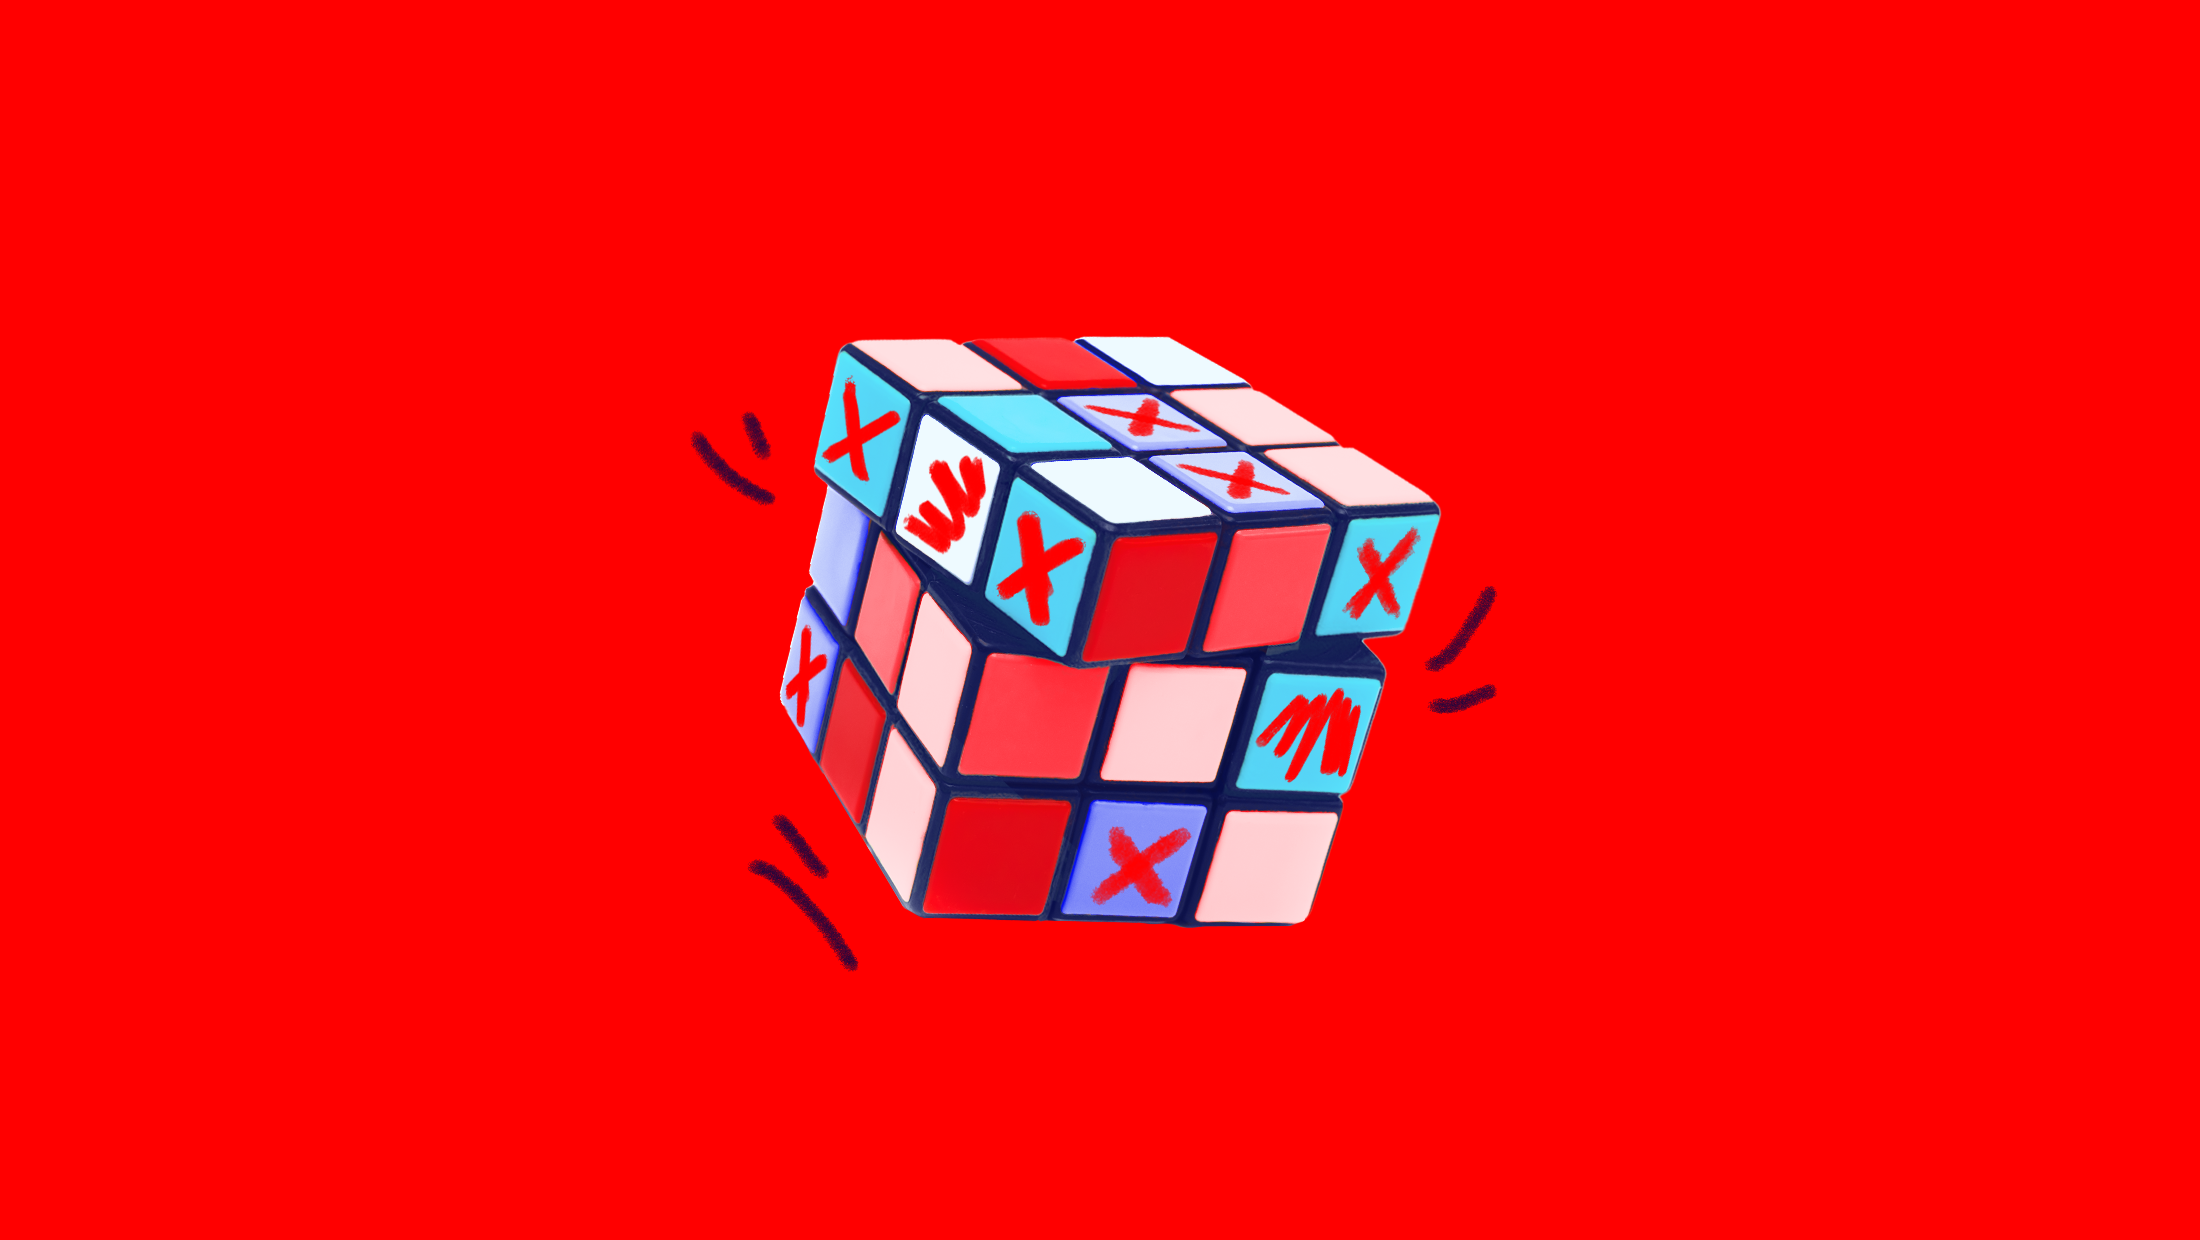 Rubik's cube with different red and blue shades and red scribbles, on a bright red background.